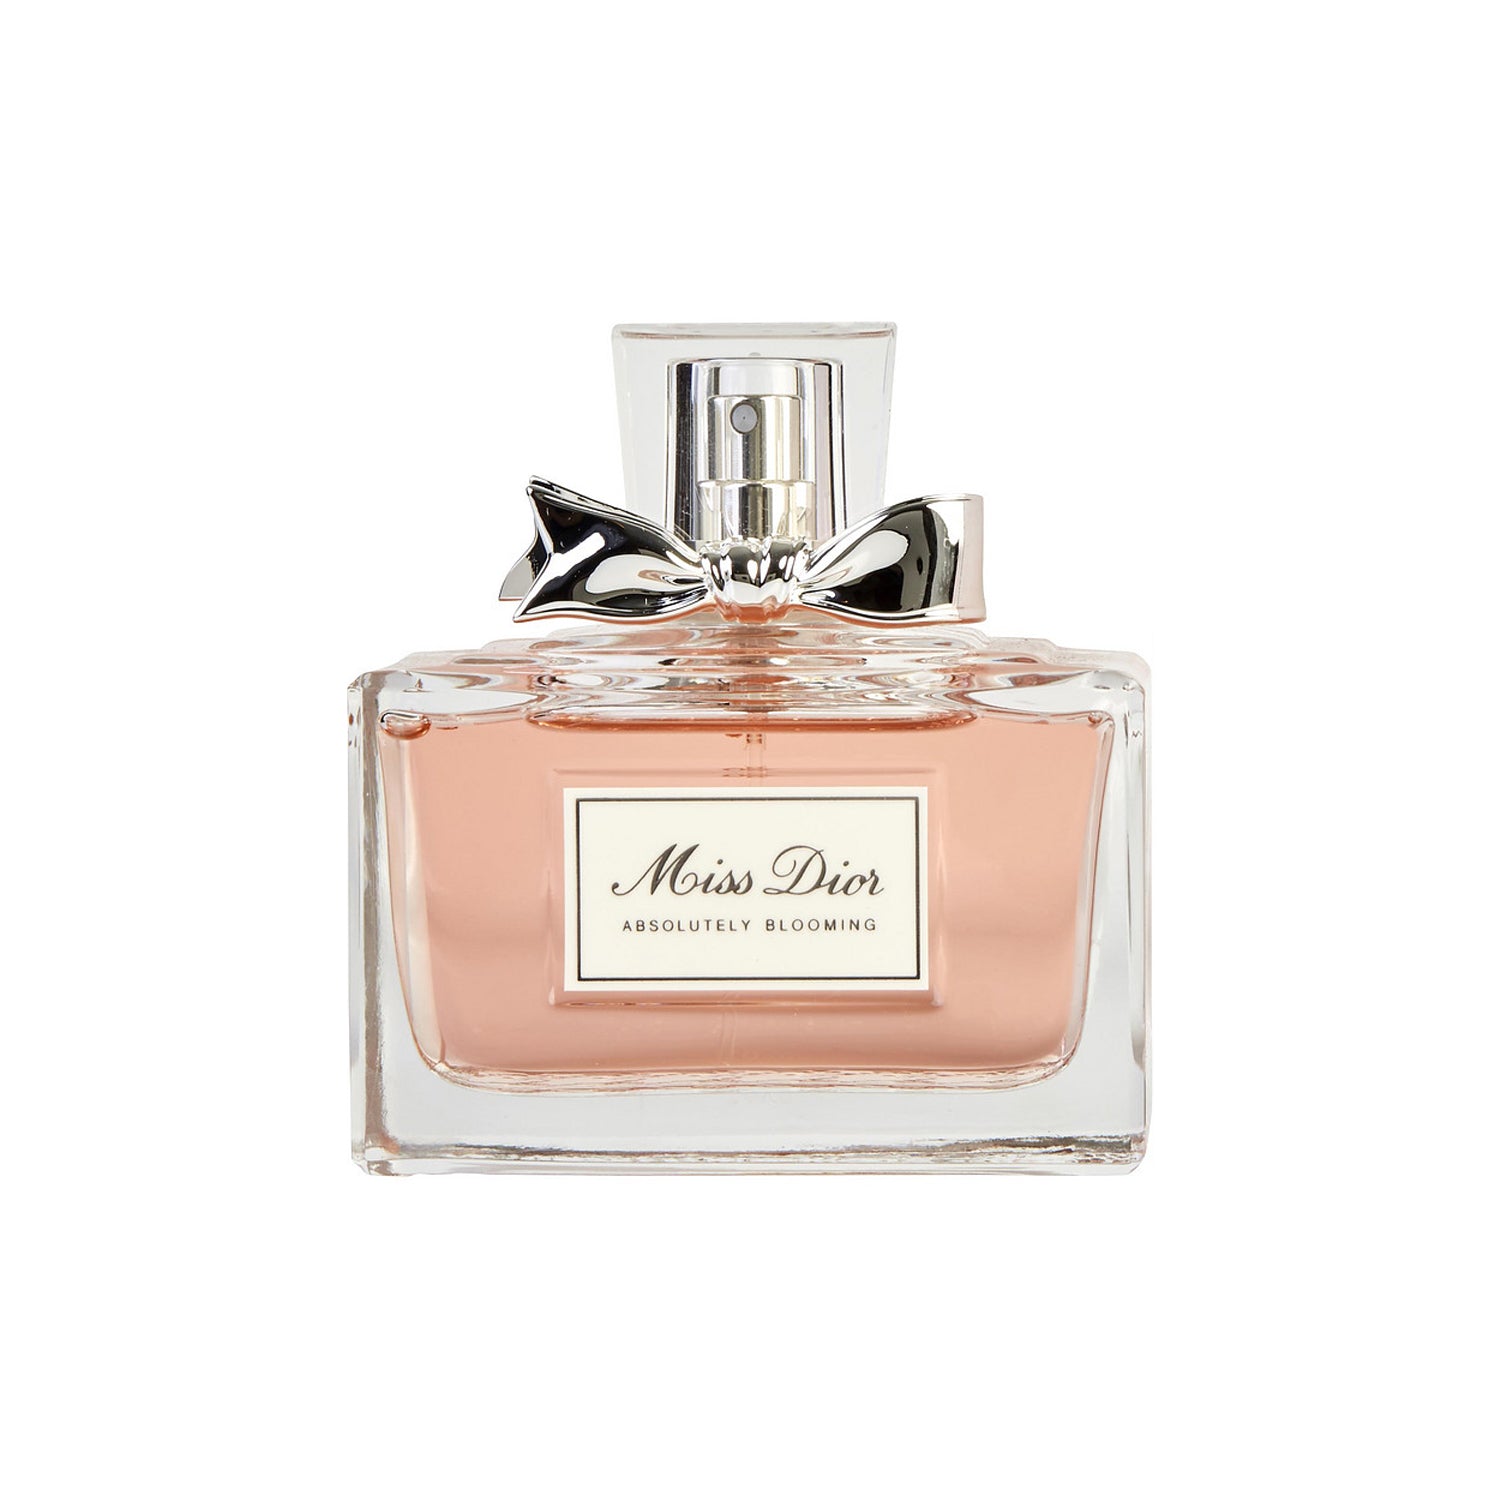 Give Miss Dior Absolutely Blooming Eau de Parfum for Holiday